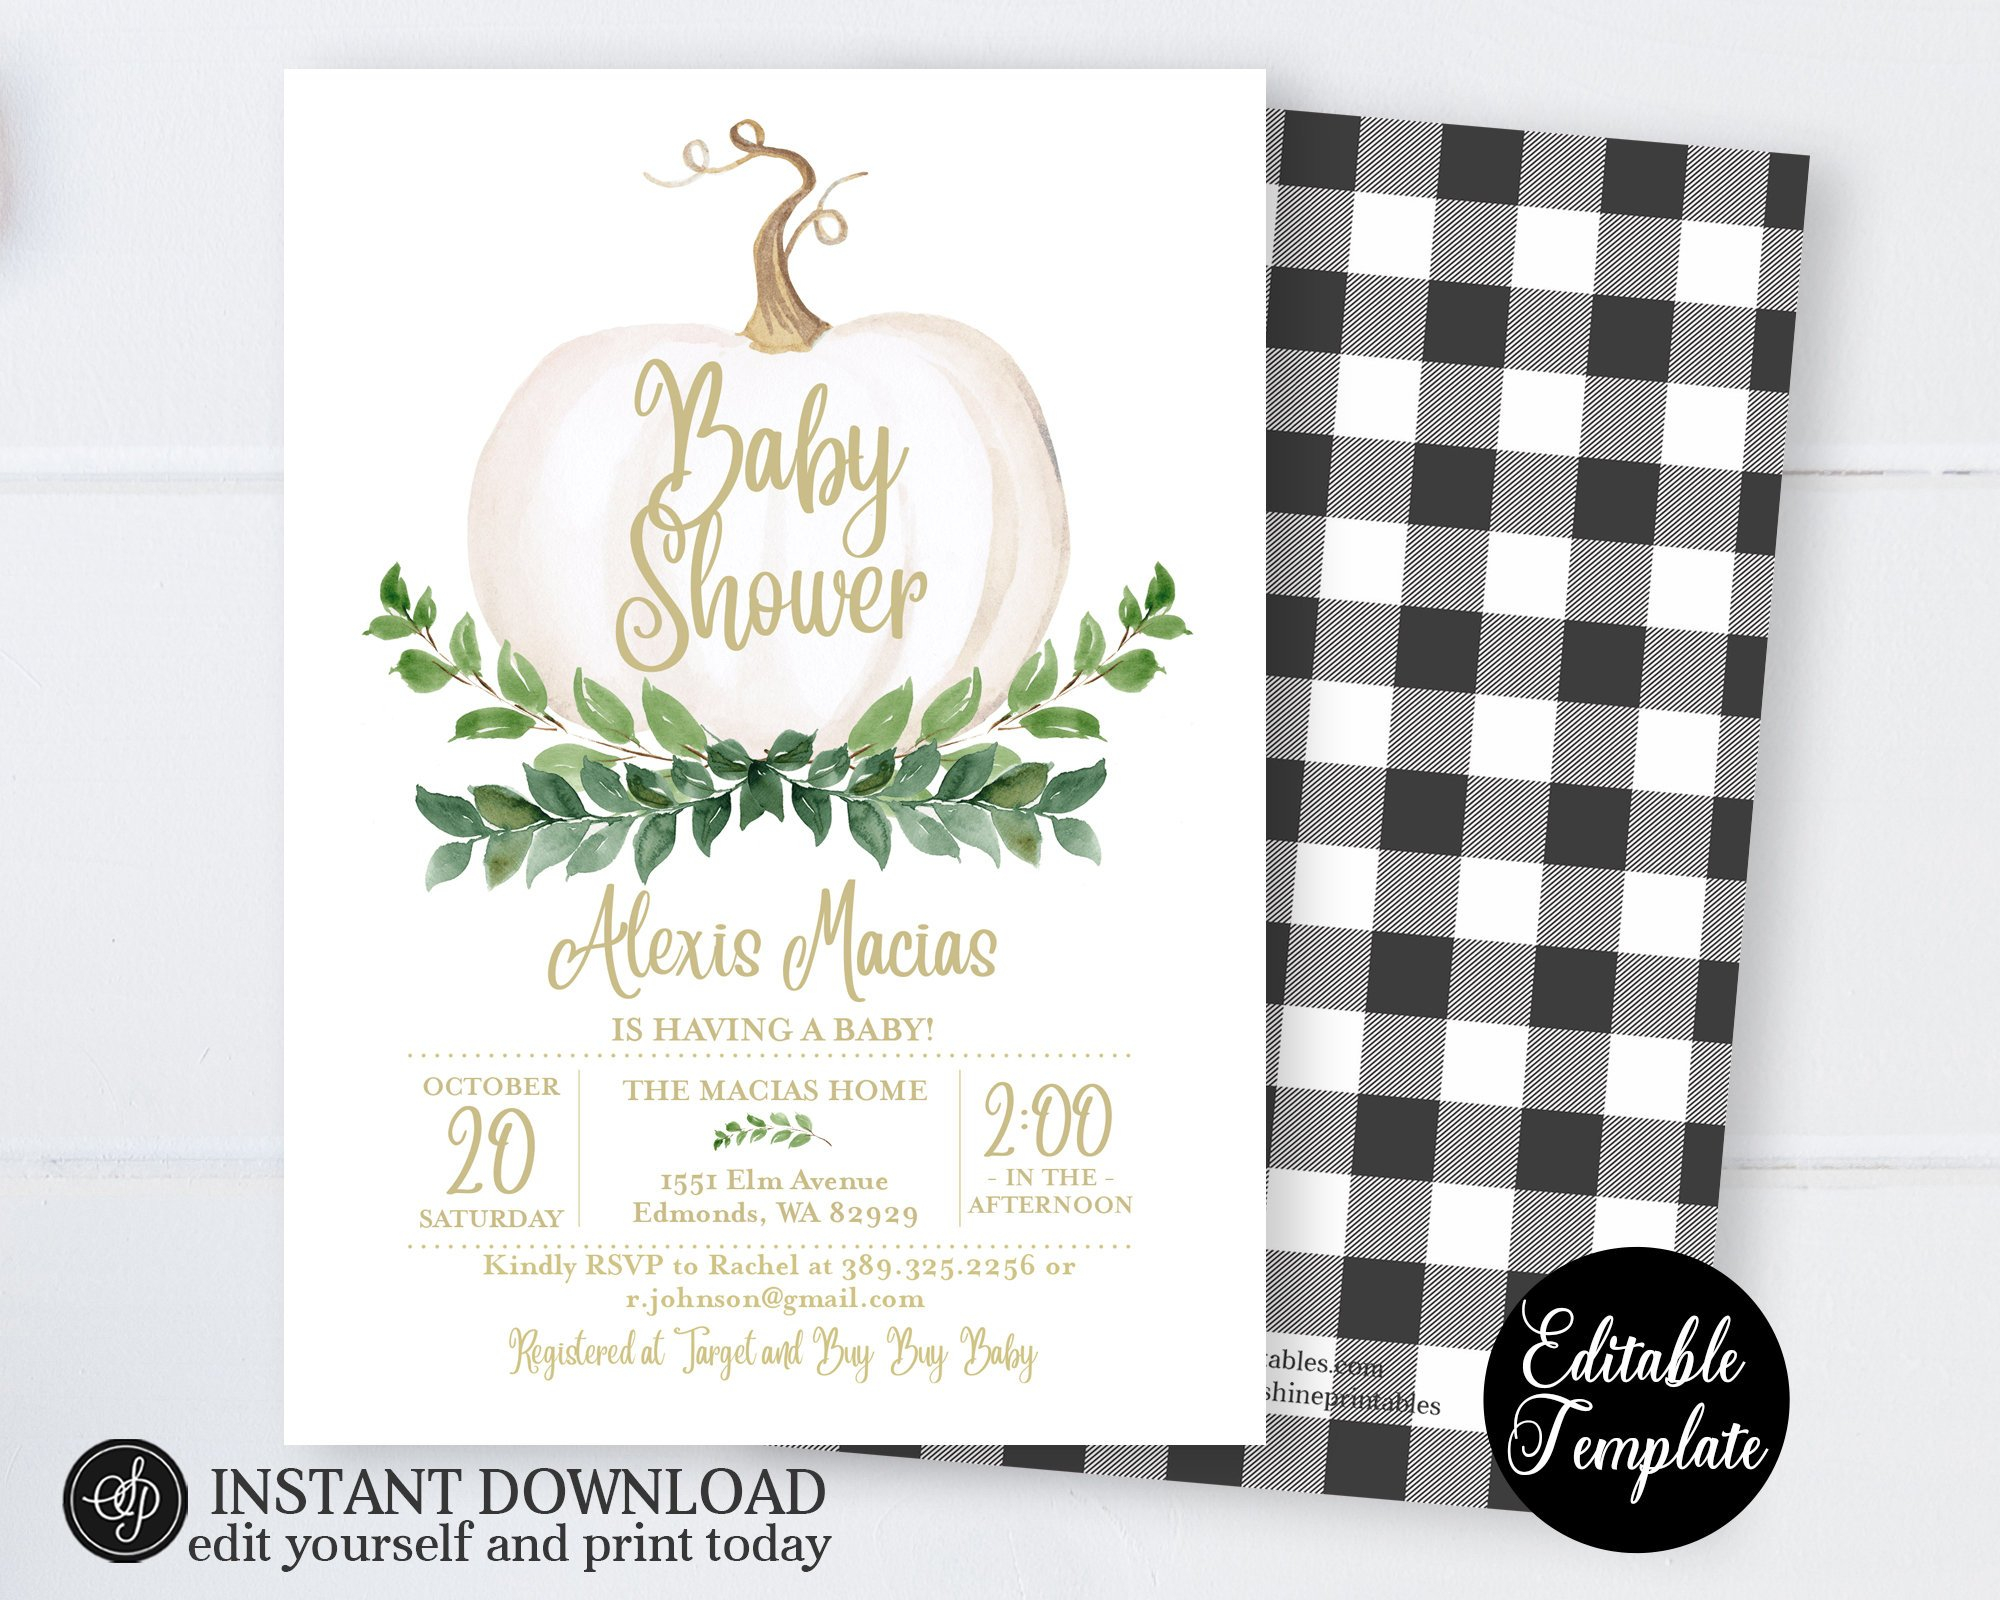 Paper & Party Supplies Templates Printable Invitation Baby Shower  Intended For Baby Shower Invitation Flyer Template In Baby Shower Invitation Flyer Template